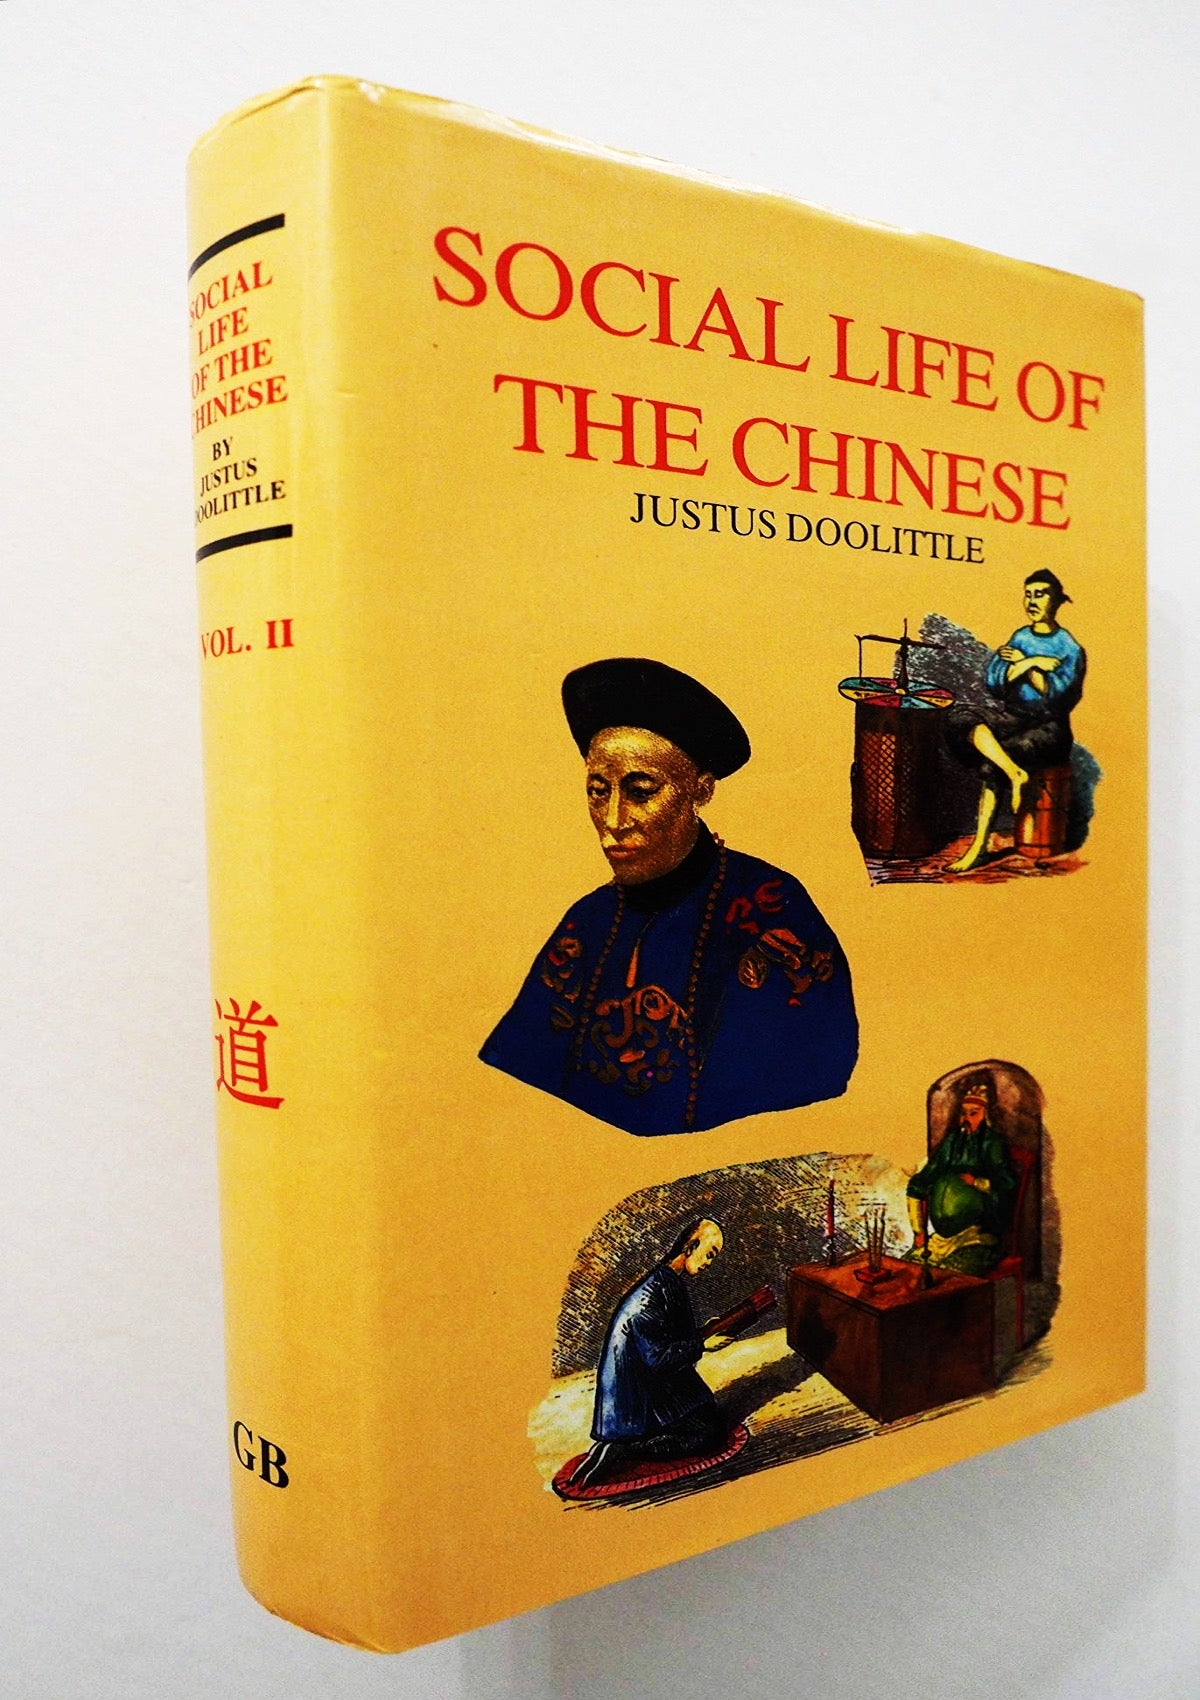 Social Life of the Chinese (vol.1)